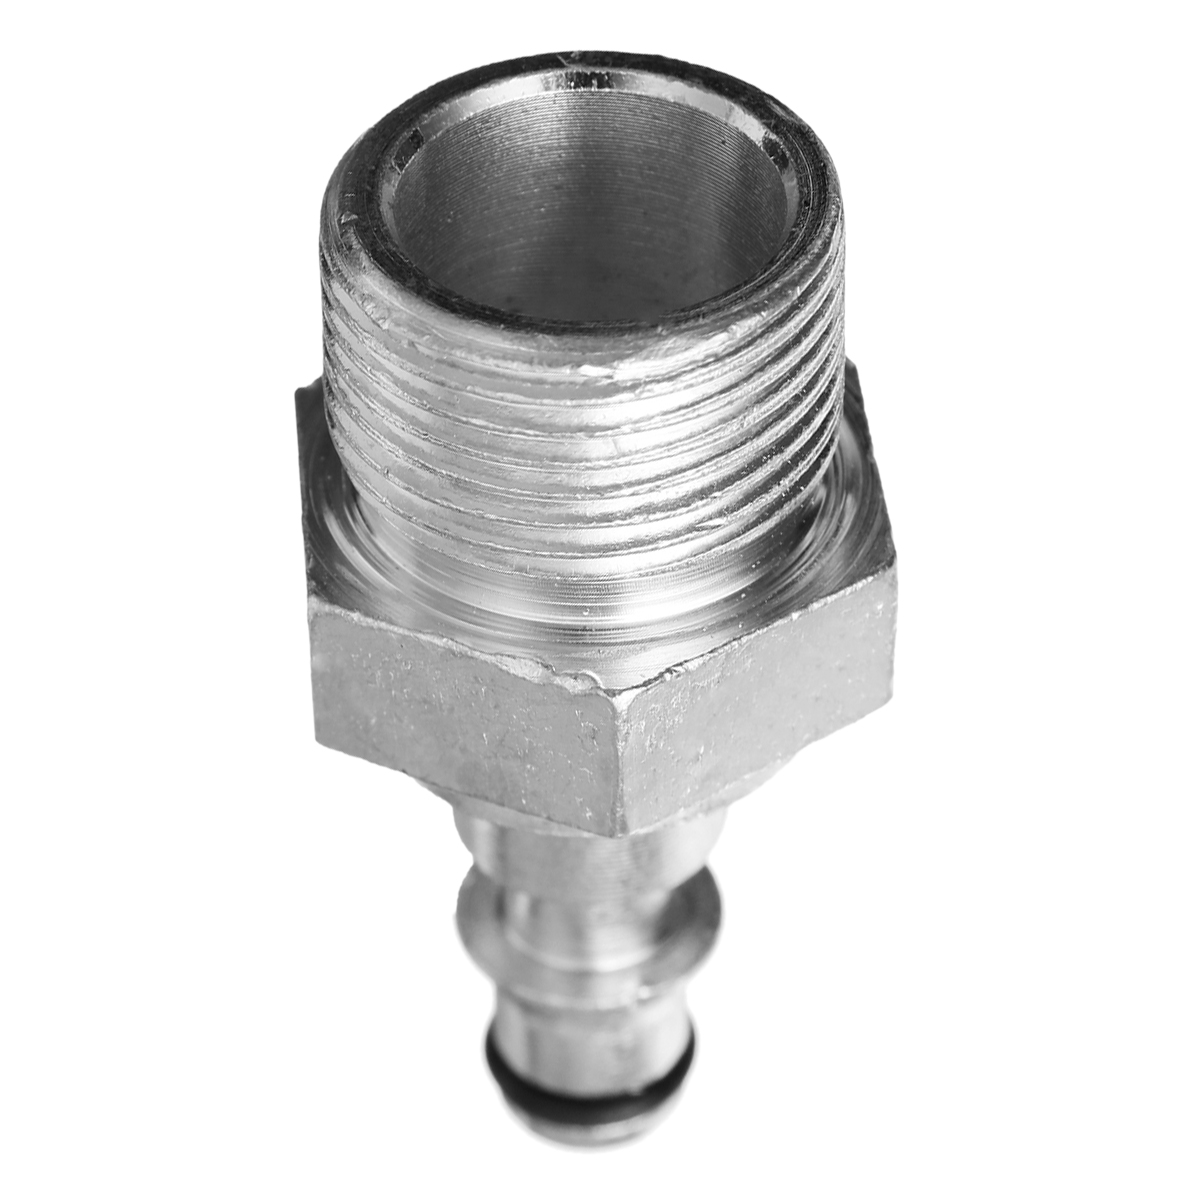 Quick-Connection-Pressure-Washer-Gun-Hose-Fitting-To-M22-Adapter-For-Lavor-VAX-1299224-4